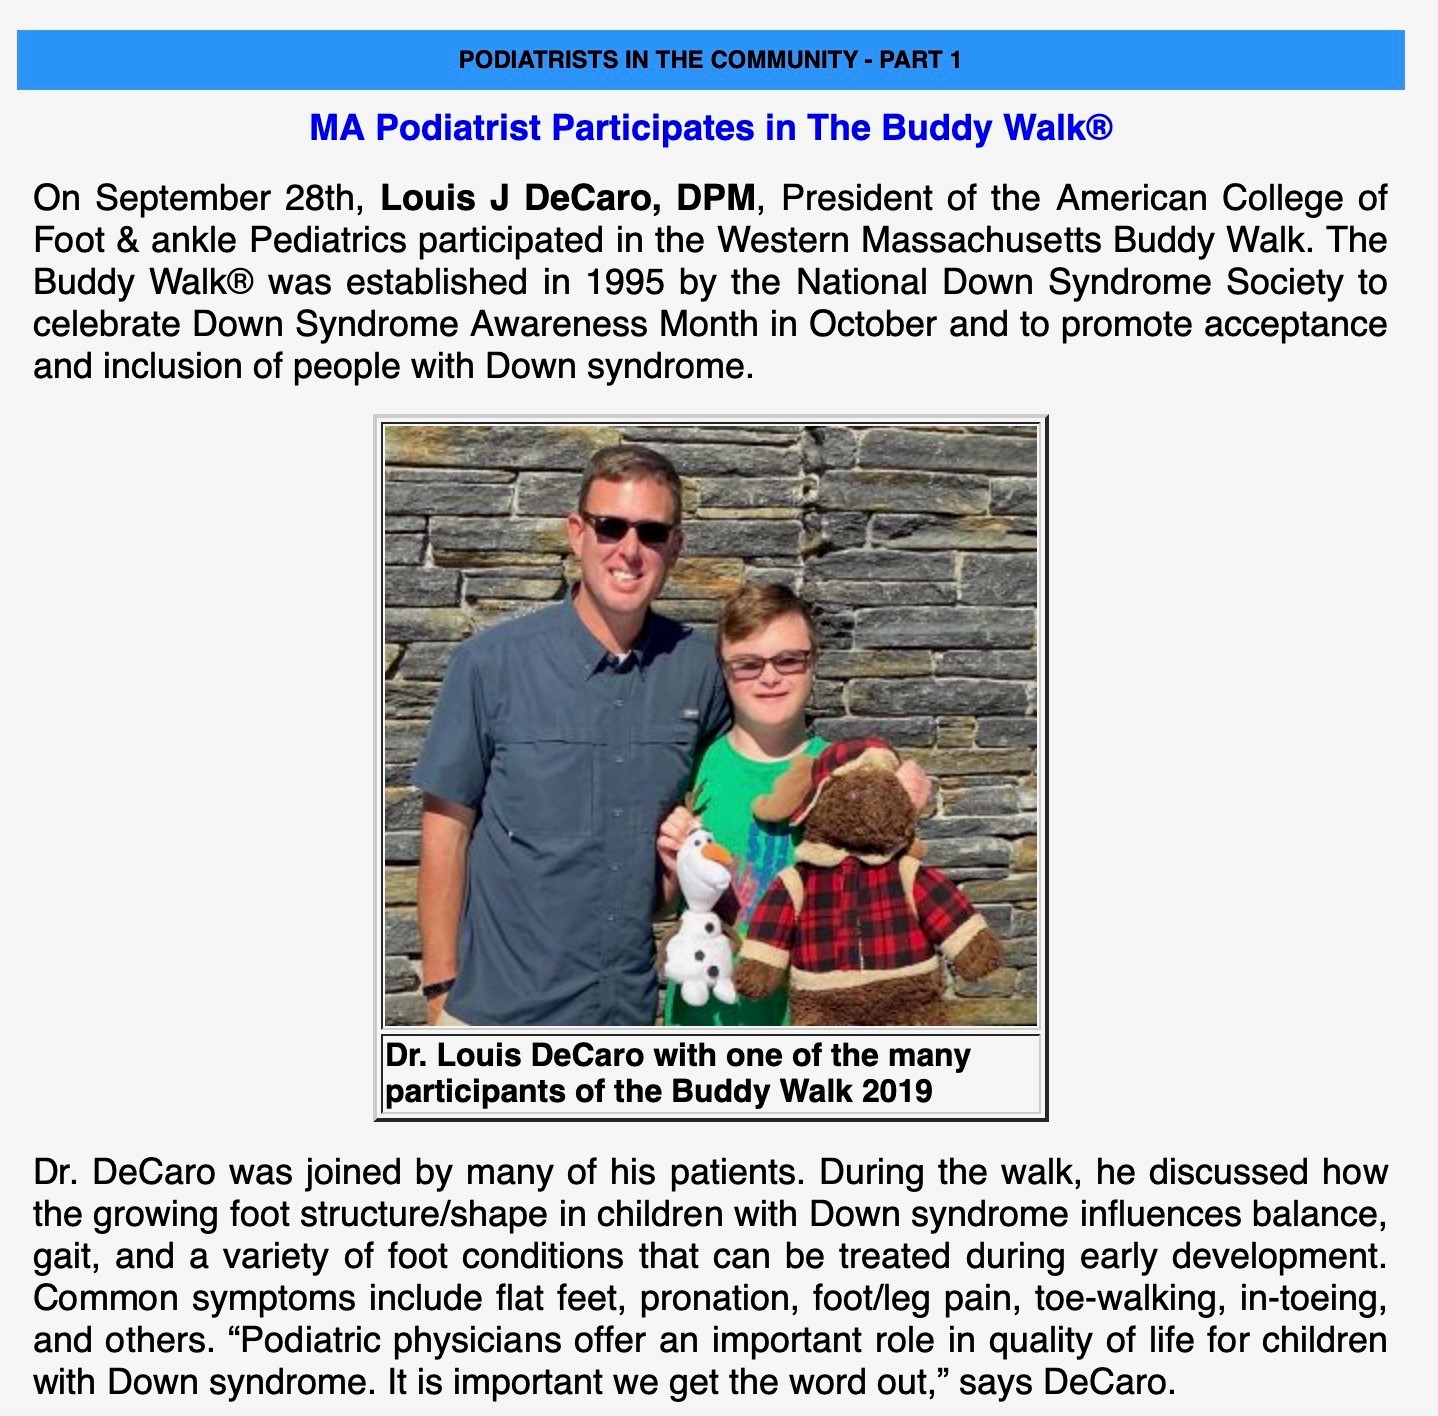 Dr Louis J DeCaro Participates in Western Mass Buddy Walk for Down Syndrome